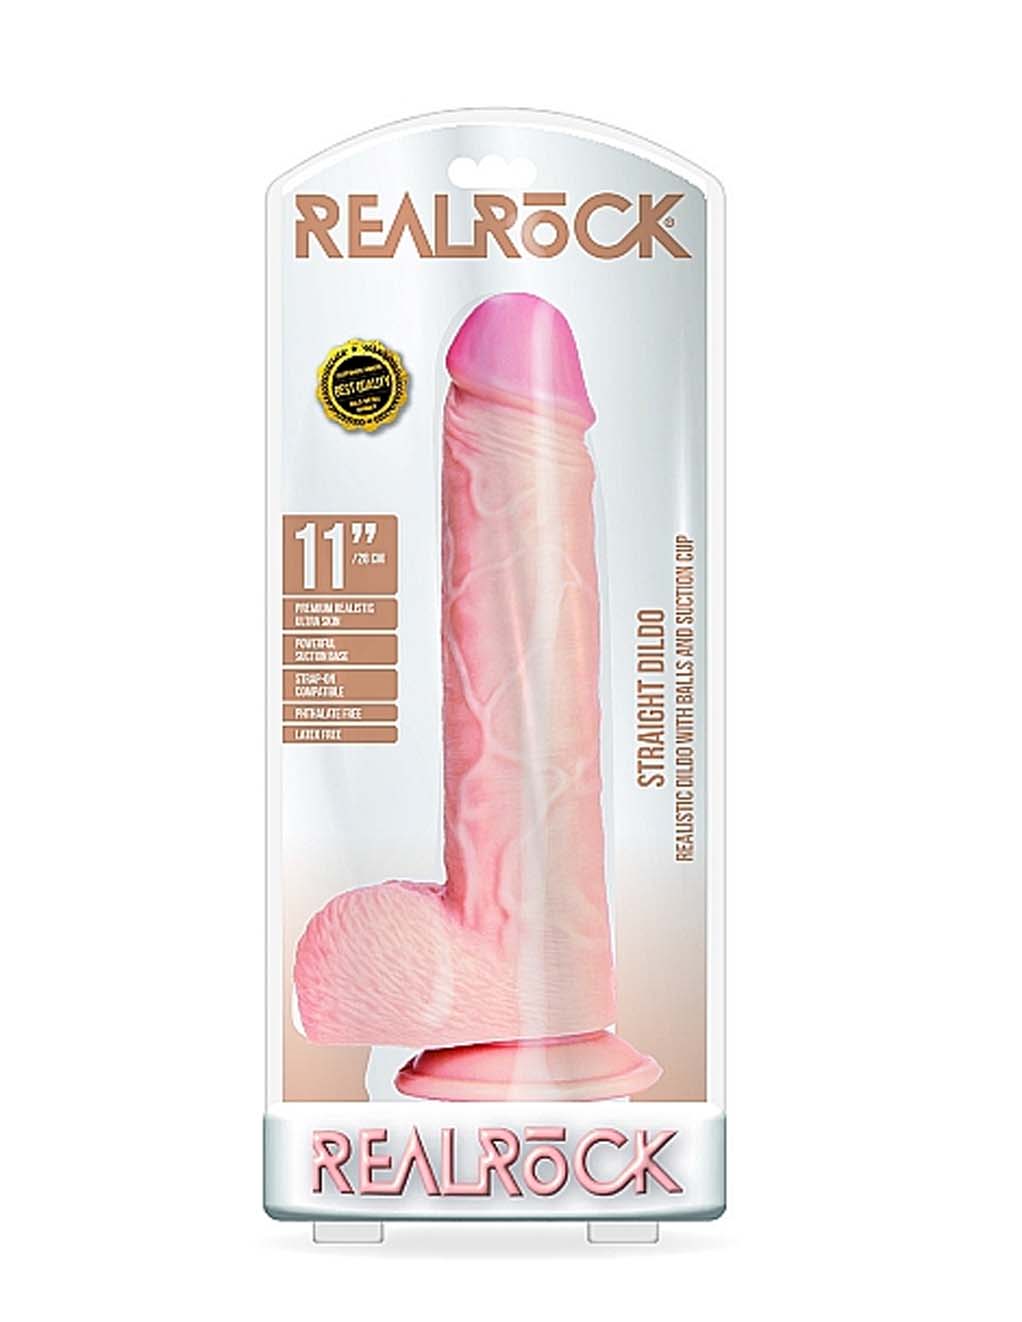 Real Rock Realistic 11" Dong with Balls- Packaging